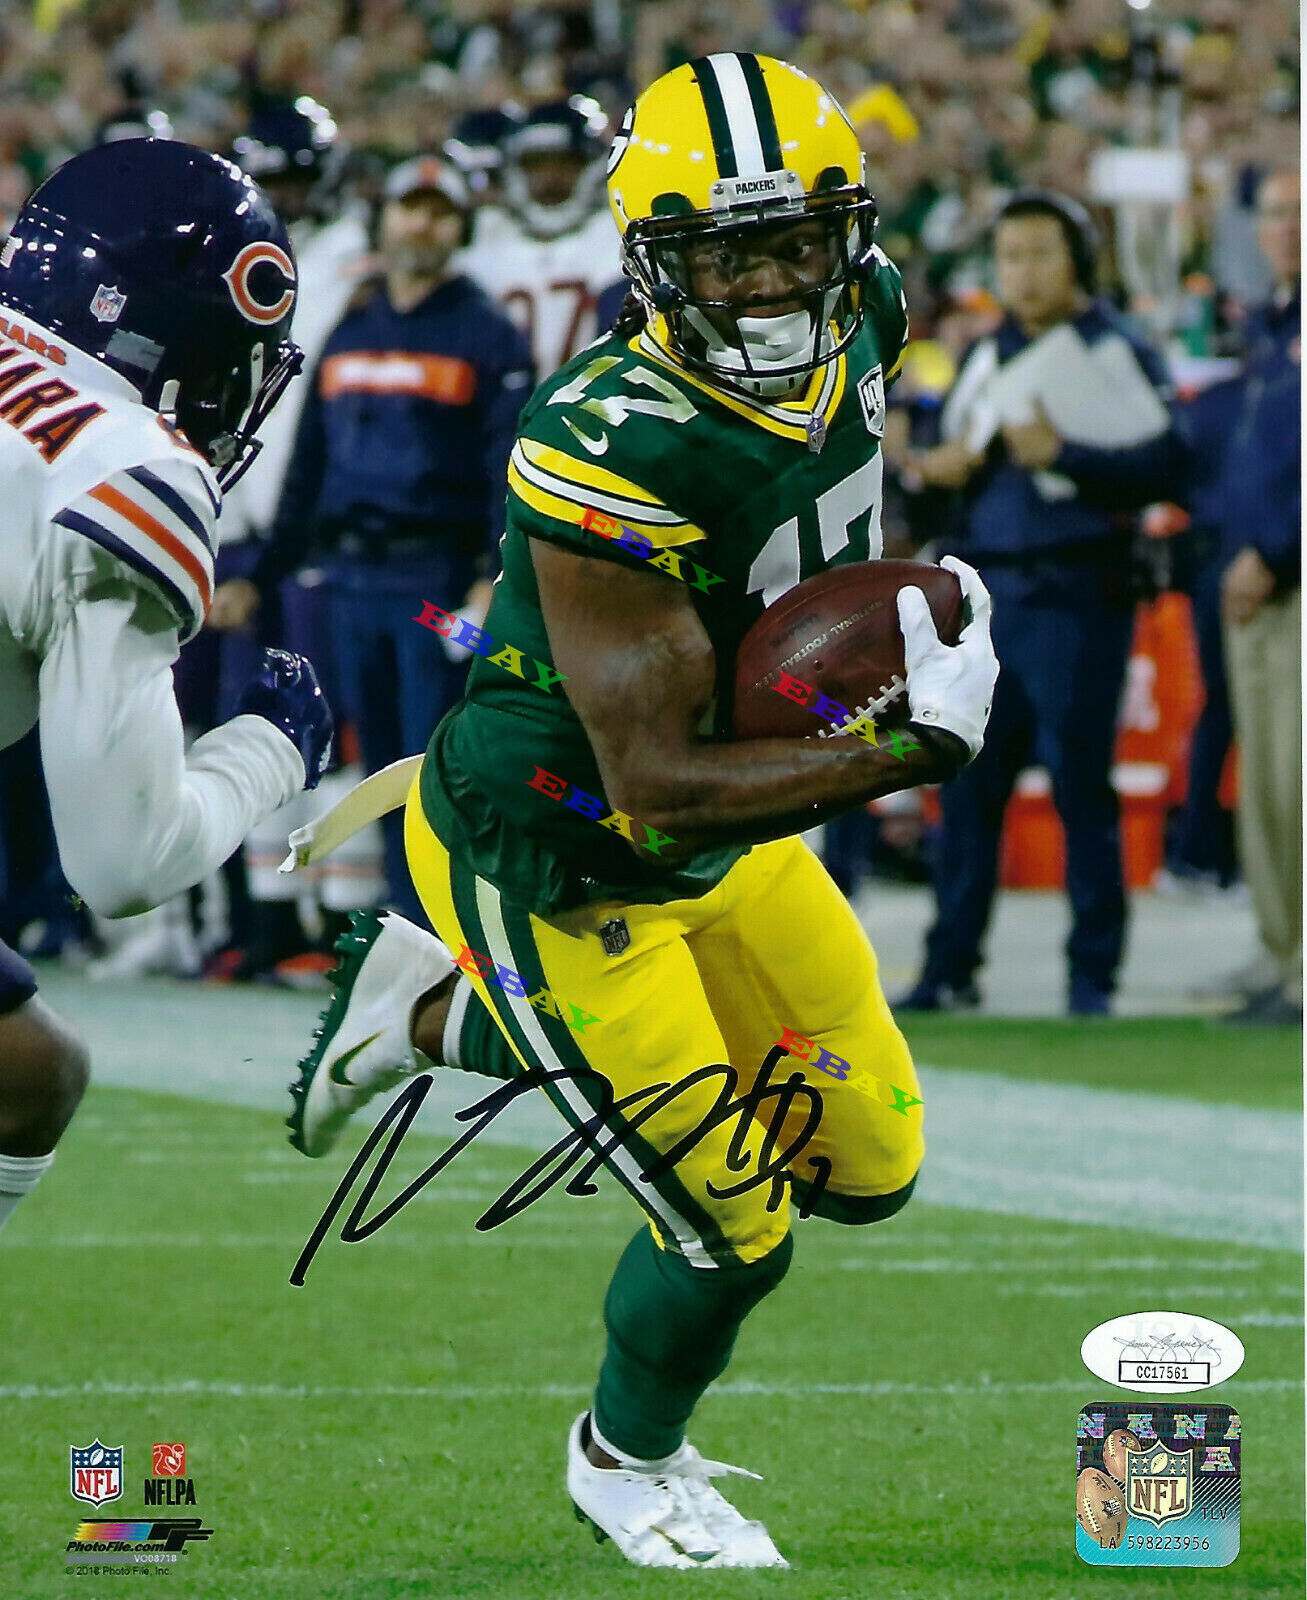 DaVante Admas Greenbay Packers Signed Autographed 8x10 Photo Poster painting Reprint